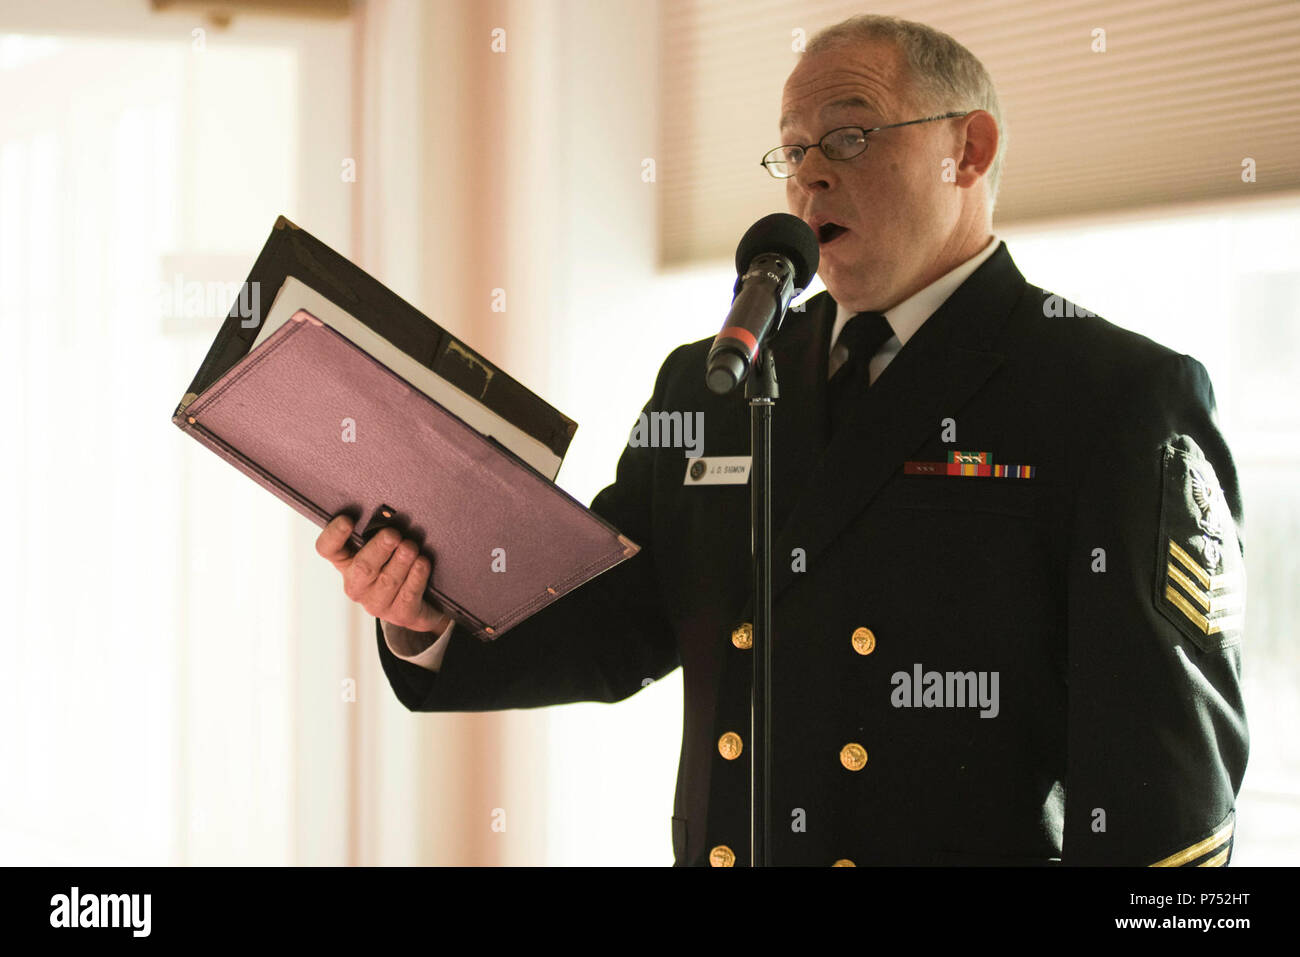 ANNANDALE, VIRGINIA  (October 30, 2016) Petty Officer 1st Class David Sigmon sings 'Shanandoah' during the U.S. Navy Band Sea Chanters chorus' 60th anniversary concert. The Sea Chanters celebrated their 60th anniversary with a concert in Annandale, Virginia, featuring alumni from the group. The chorus was formed as an all-male group in 1956 and tasked with perpetuating the songs of the sea. In 1980, the group added women to their ranks and expanded their repertoire to include everything from Brahms to Broadway. Stock Photo